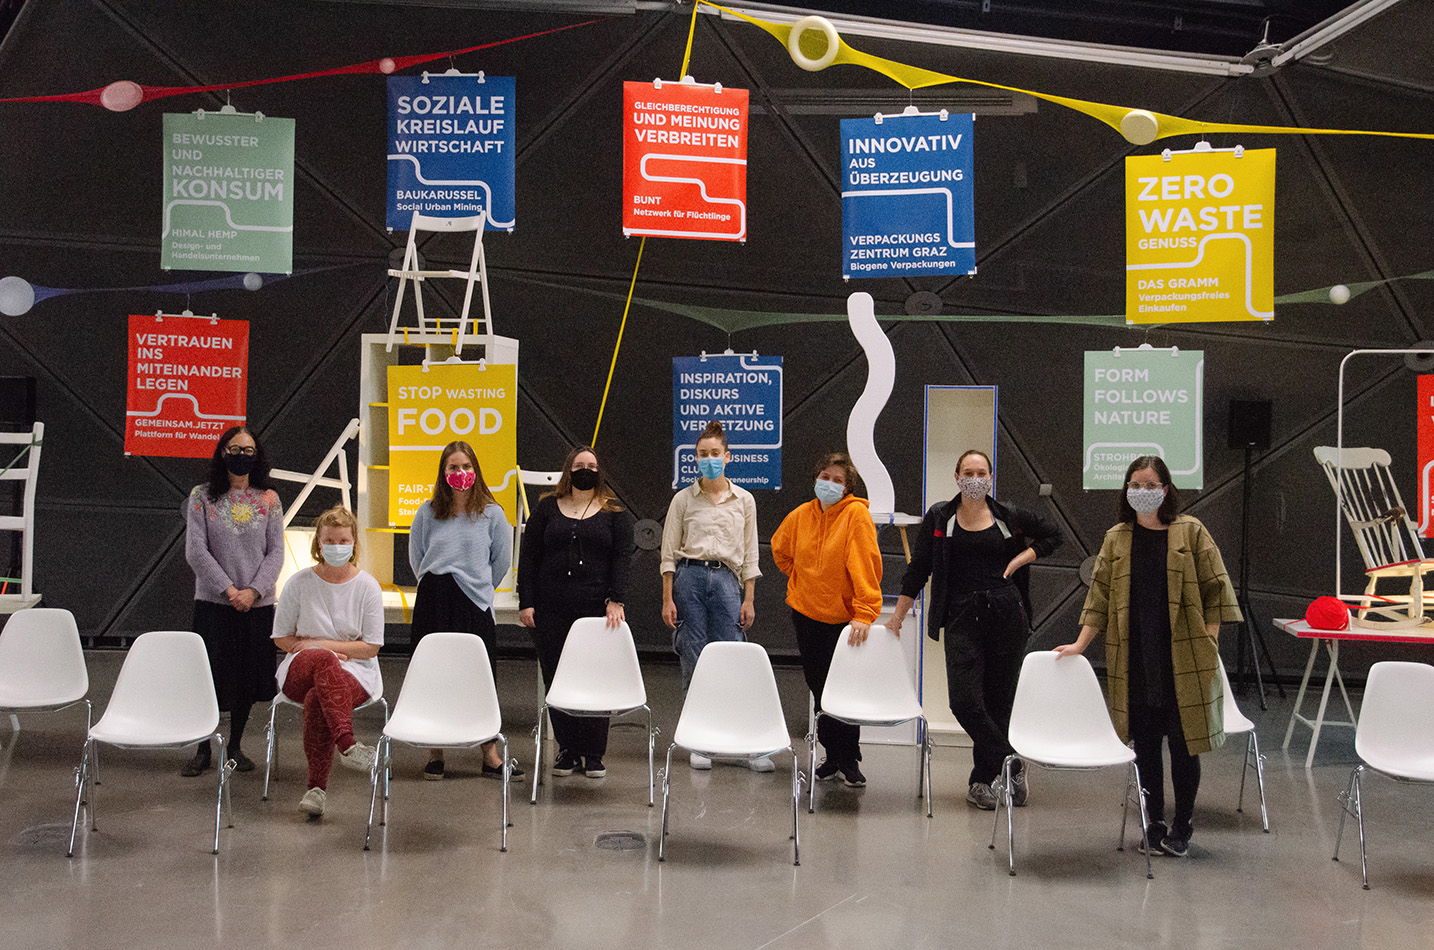 Exhibition designers from the FH made some future ideas for the Kunsthaus Graz. - Photo: Julia Hendrysiak